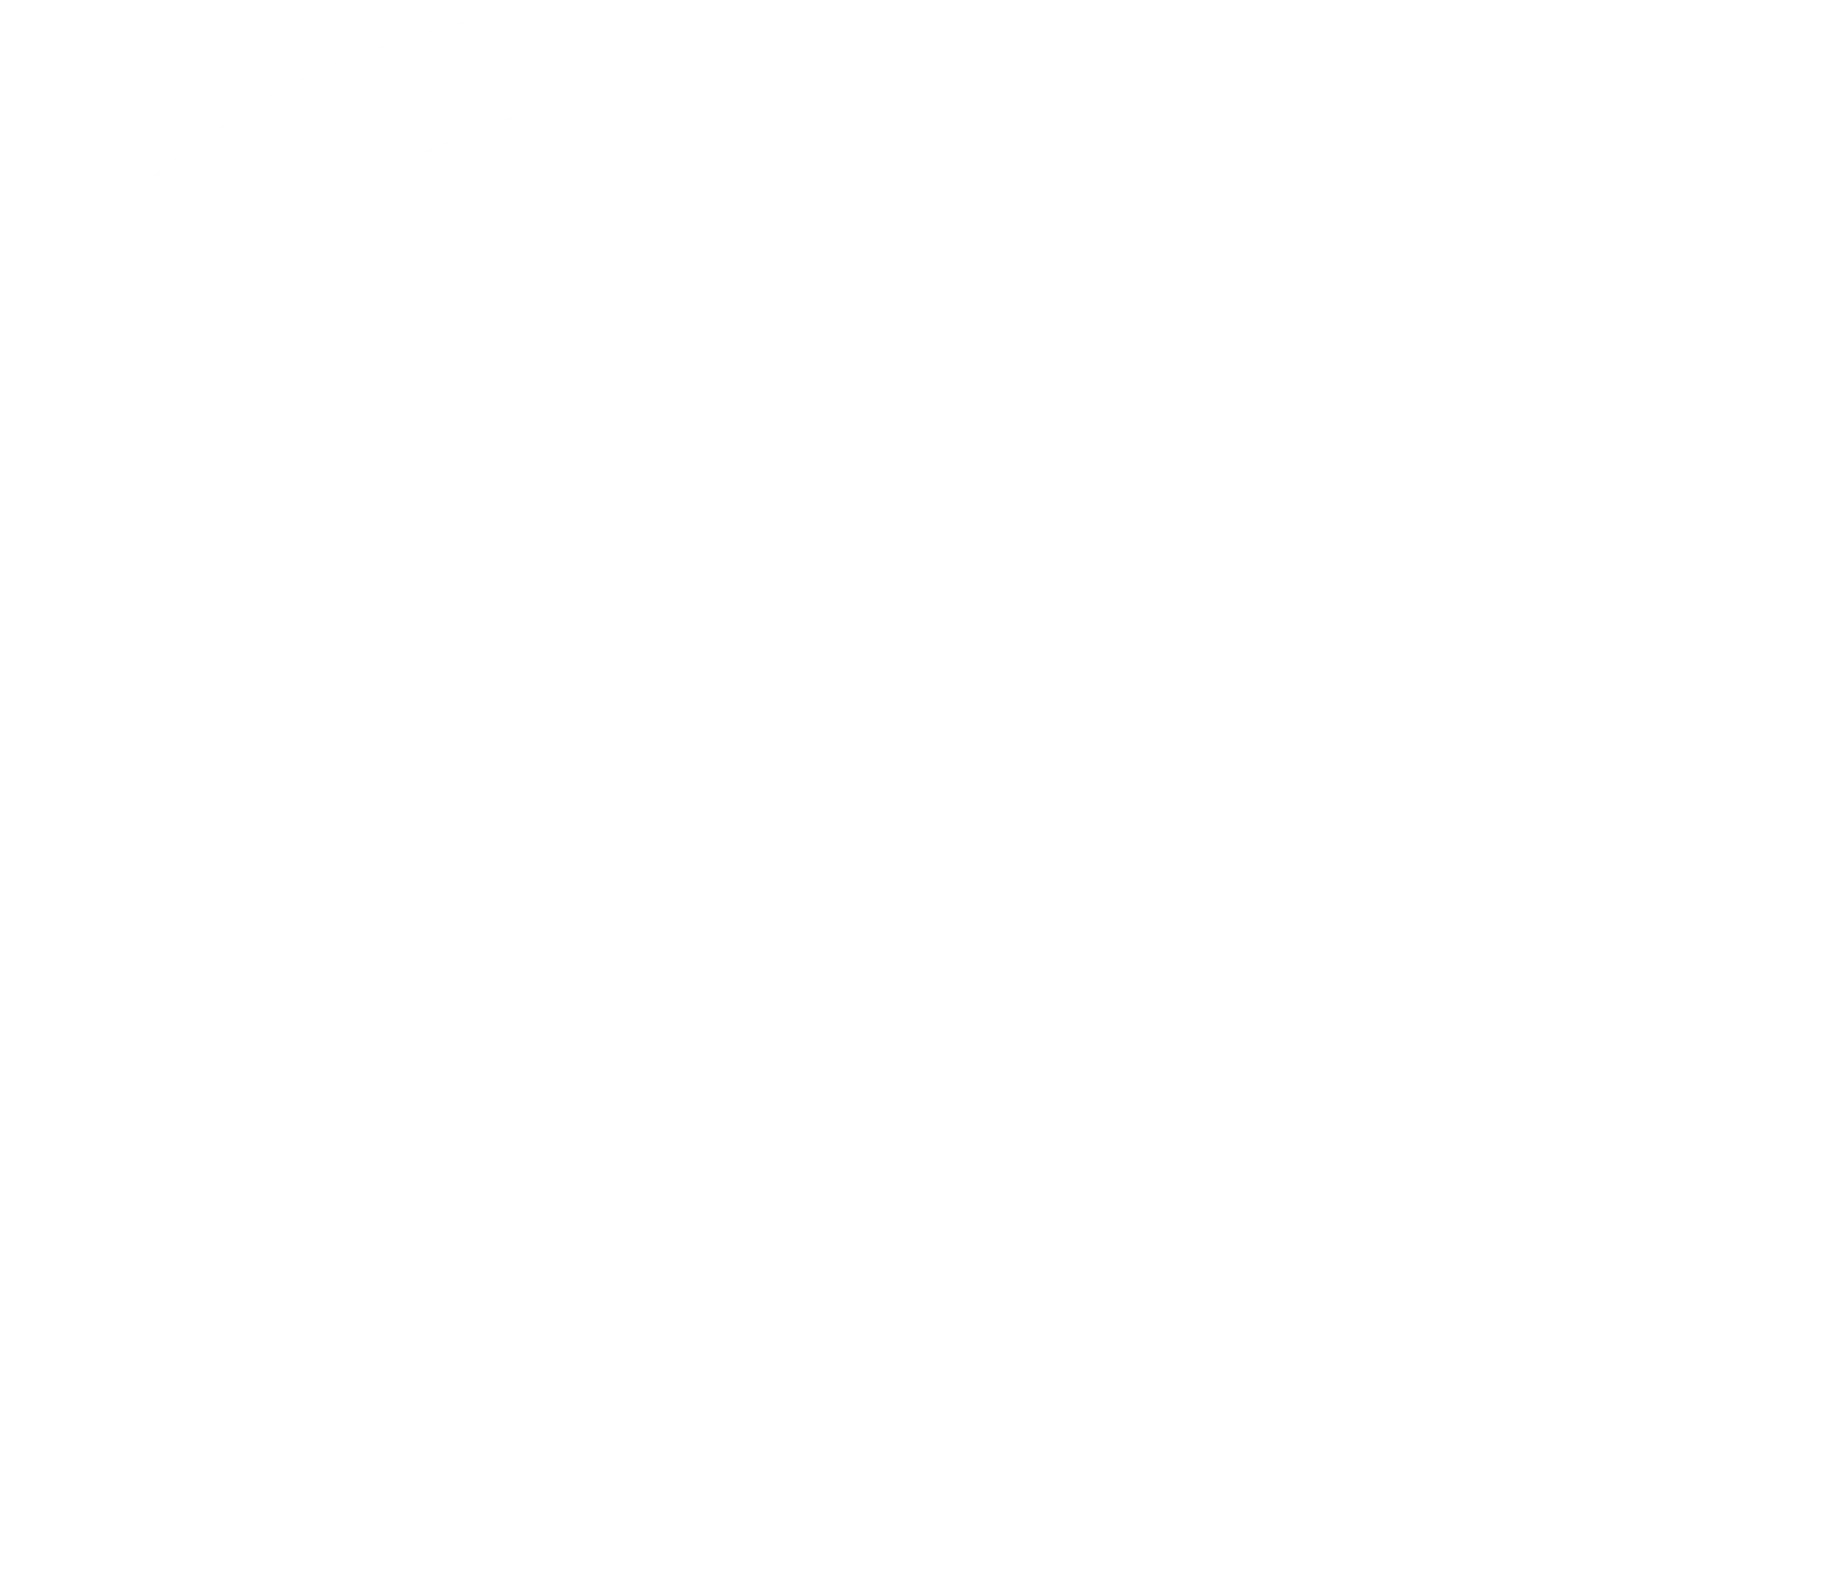 Chris Roberts Forest Foundation